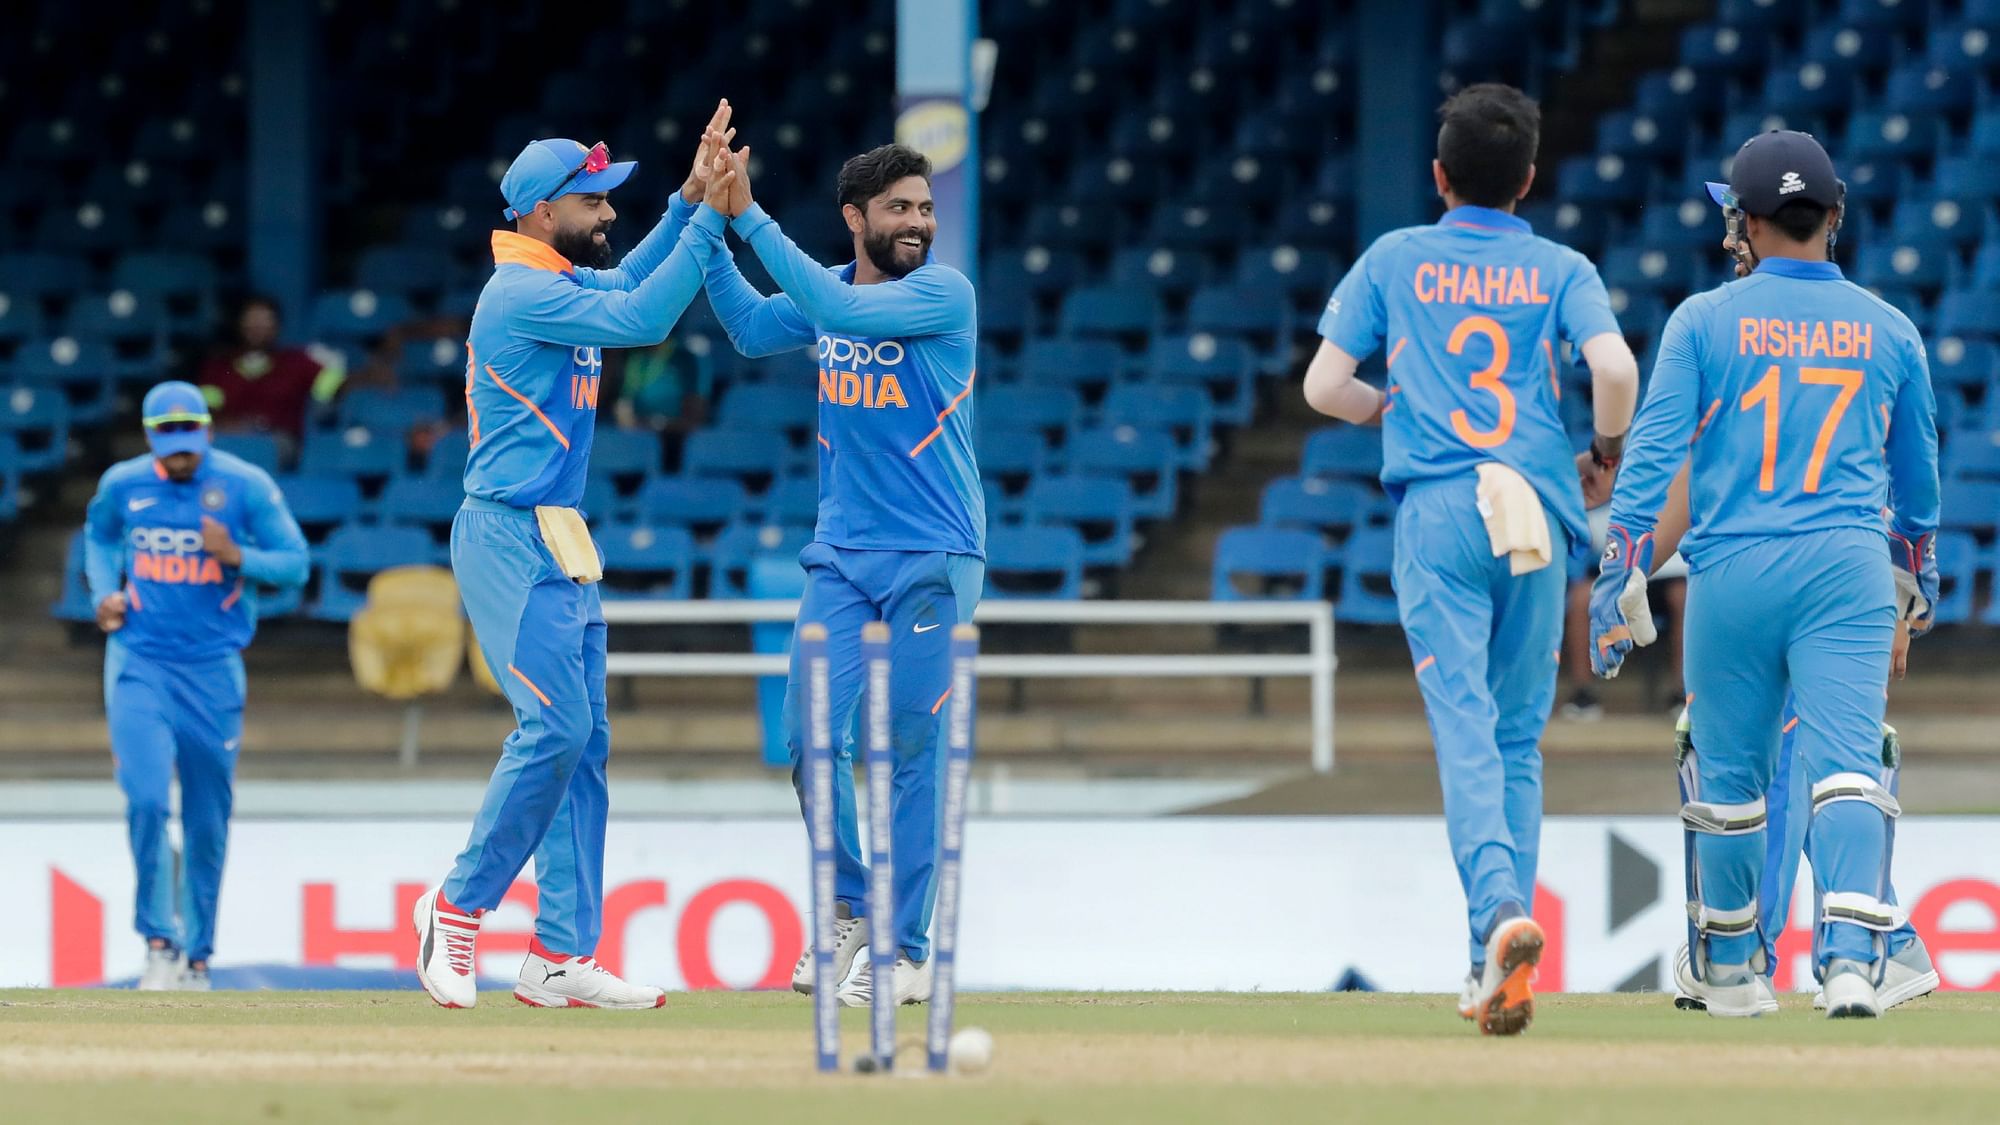 Virat Kohli and Shreyas Iyer guided India to a comfortable win which translated into a 2-0 series victory.